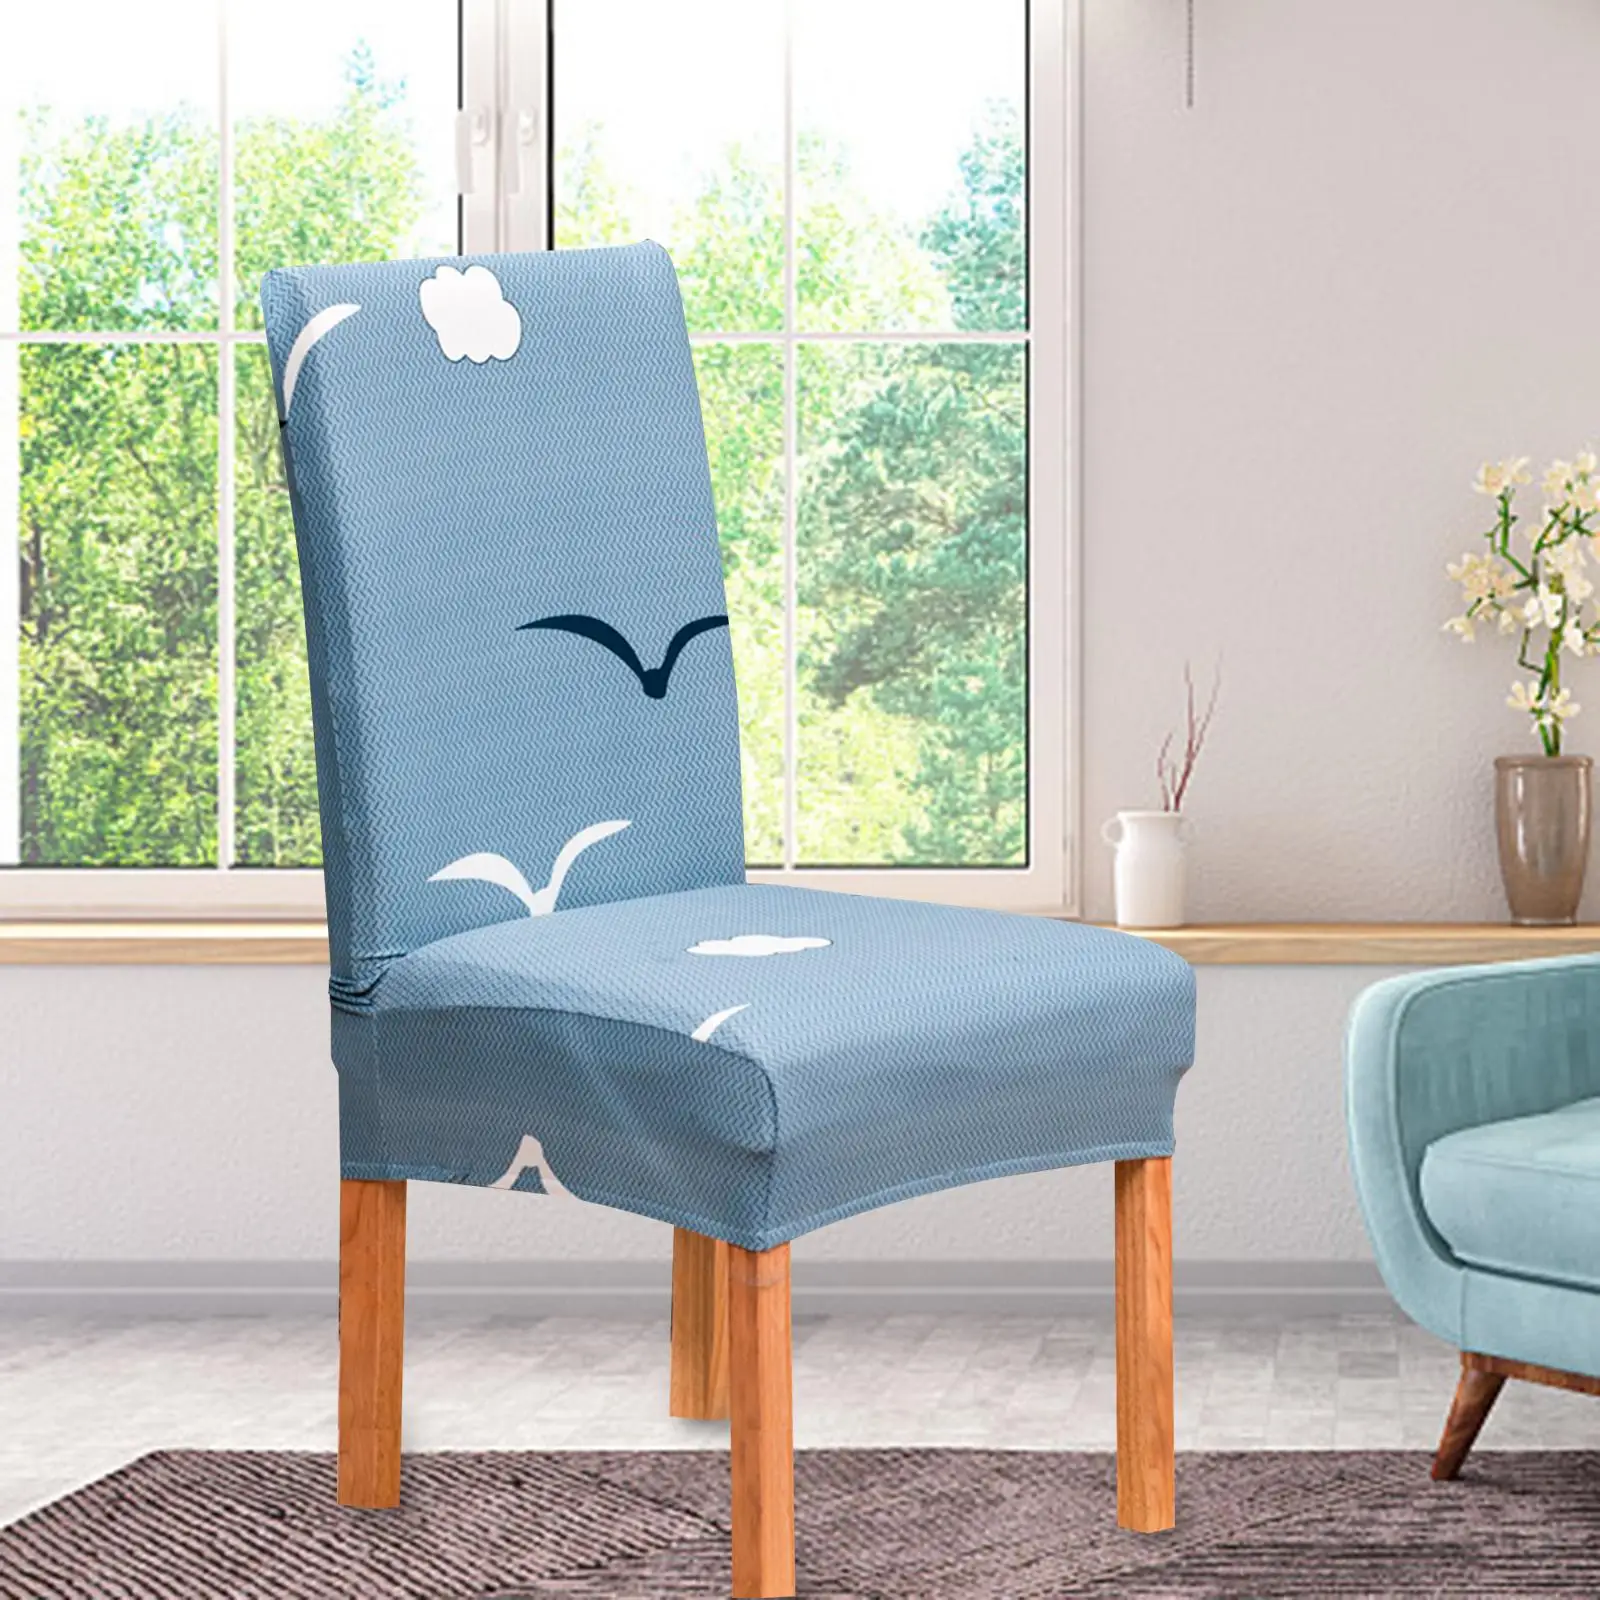 Armless Chair Slipcovers Couch Cover Seat Chair Covers Removable Furniture Protector Stretch for Home Dinning Bedroom Banquet